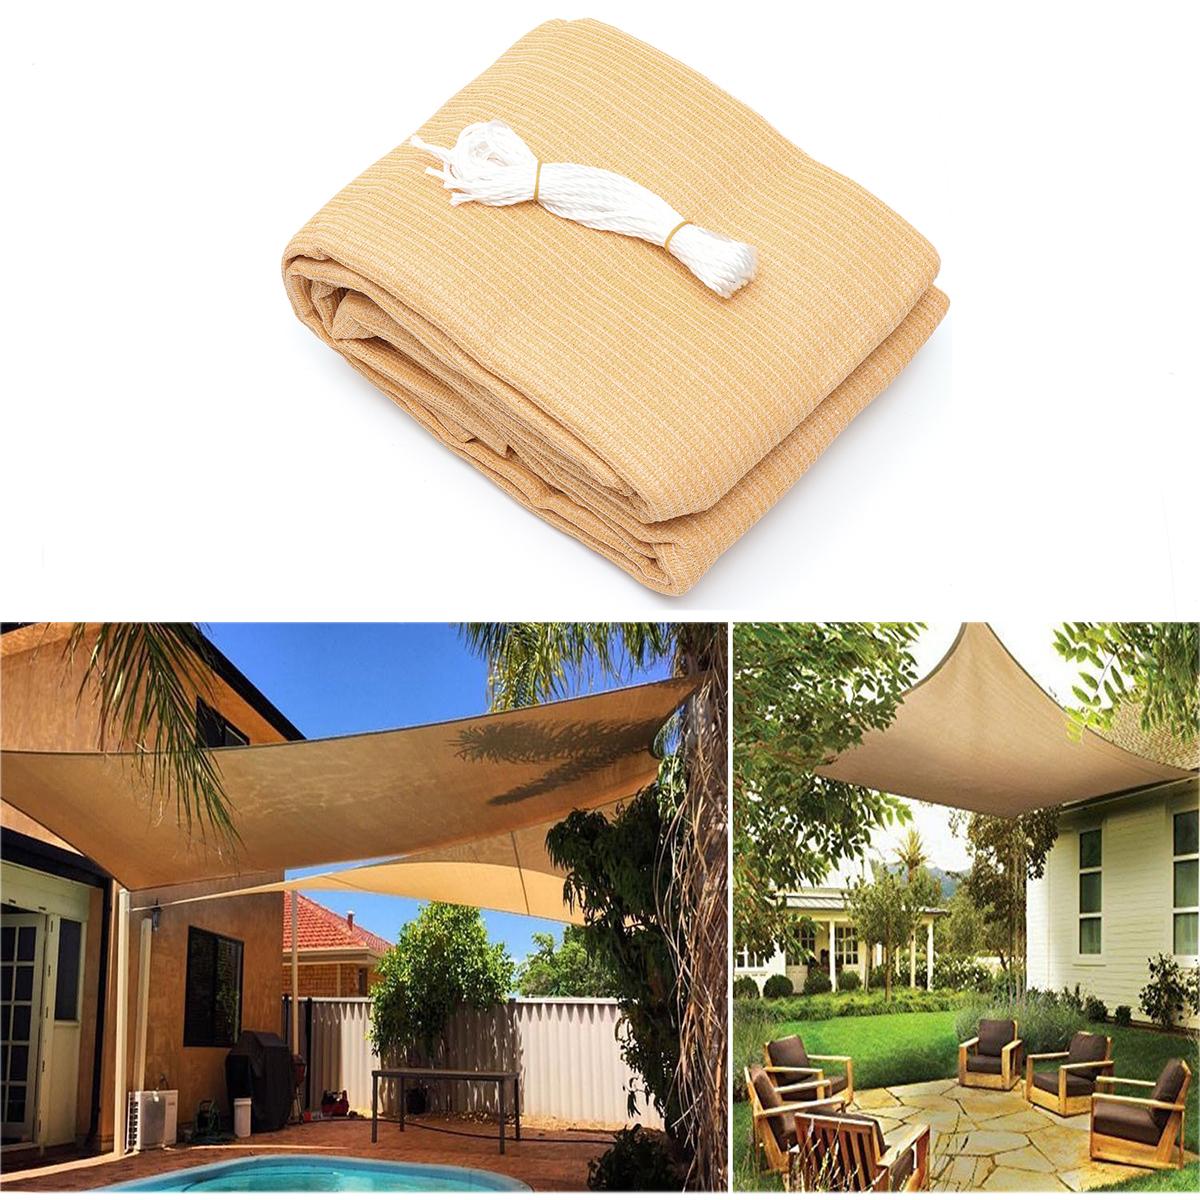 3 3m 280gsm Hdpe Sun Shade Sail Cloth Canopy Awning Shelter Outdoor Buy Online At Best Prices In Pakistan Daraz Pk